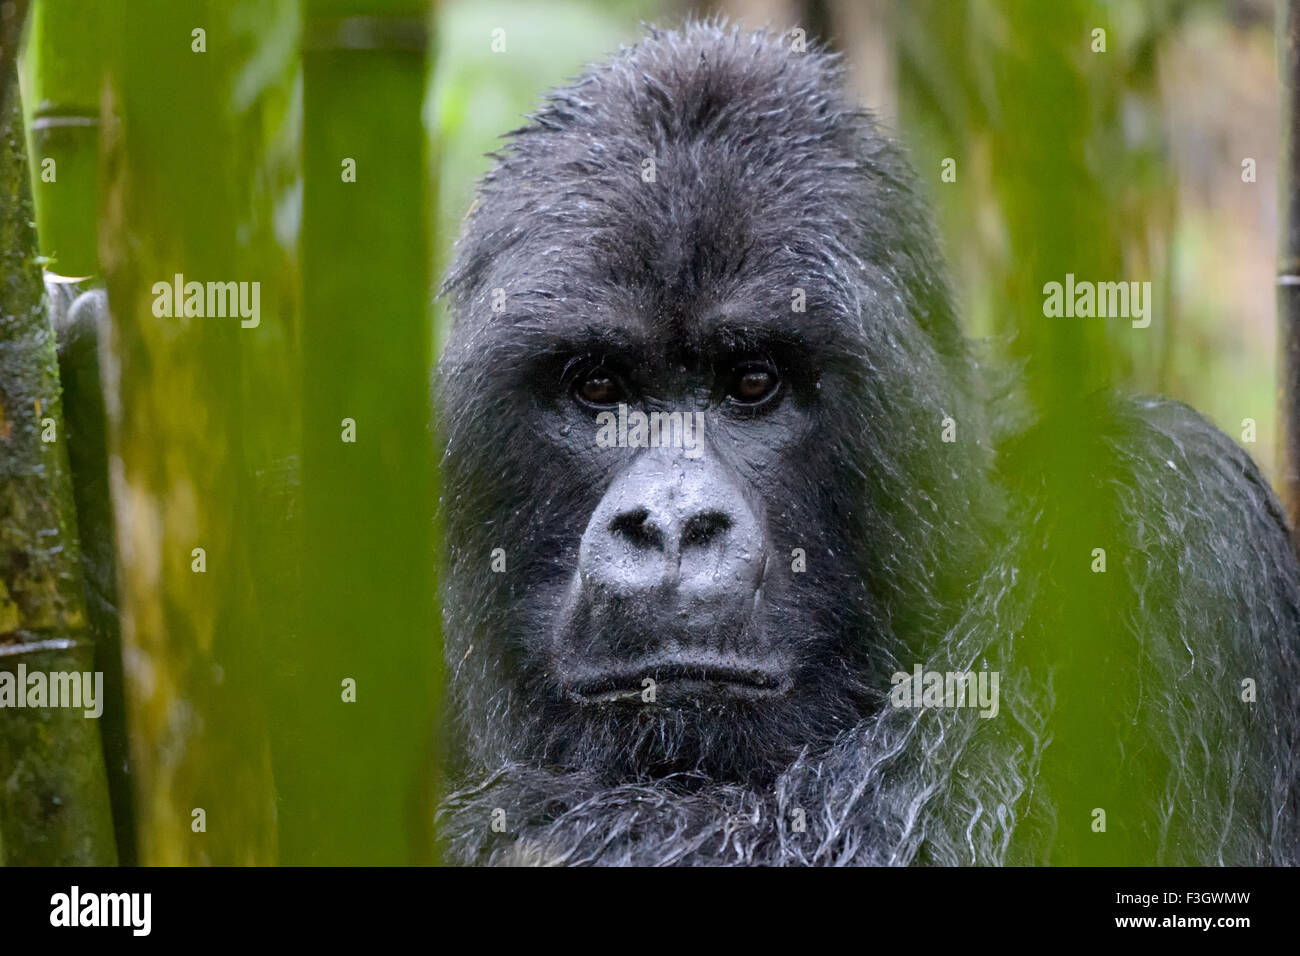 Mountain Gorilla (Gorilla gorilla beringei) large silverback male from the Sabyinyo group, portrait in bamboo forest and rain, l Stock Photo